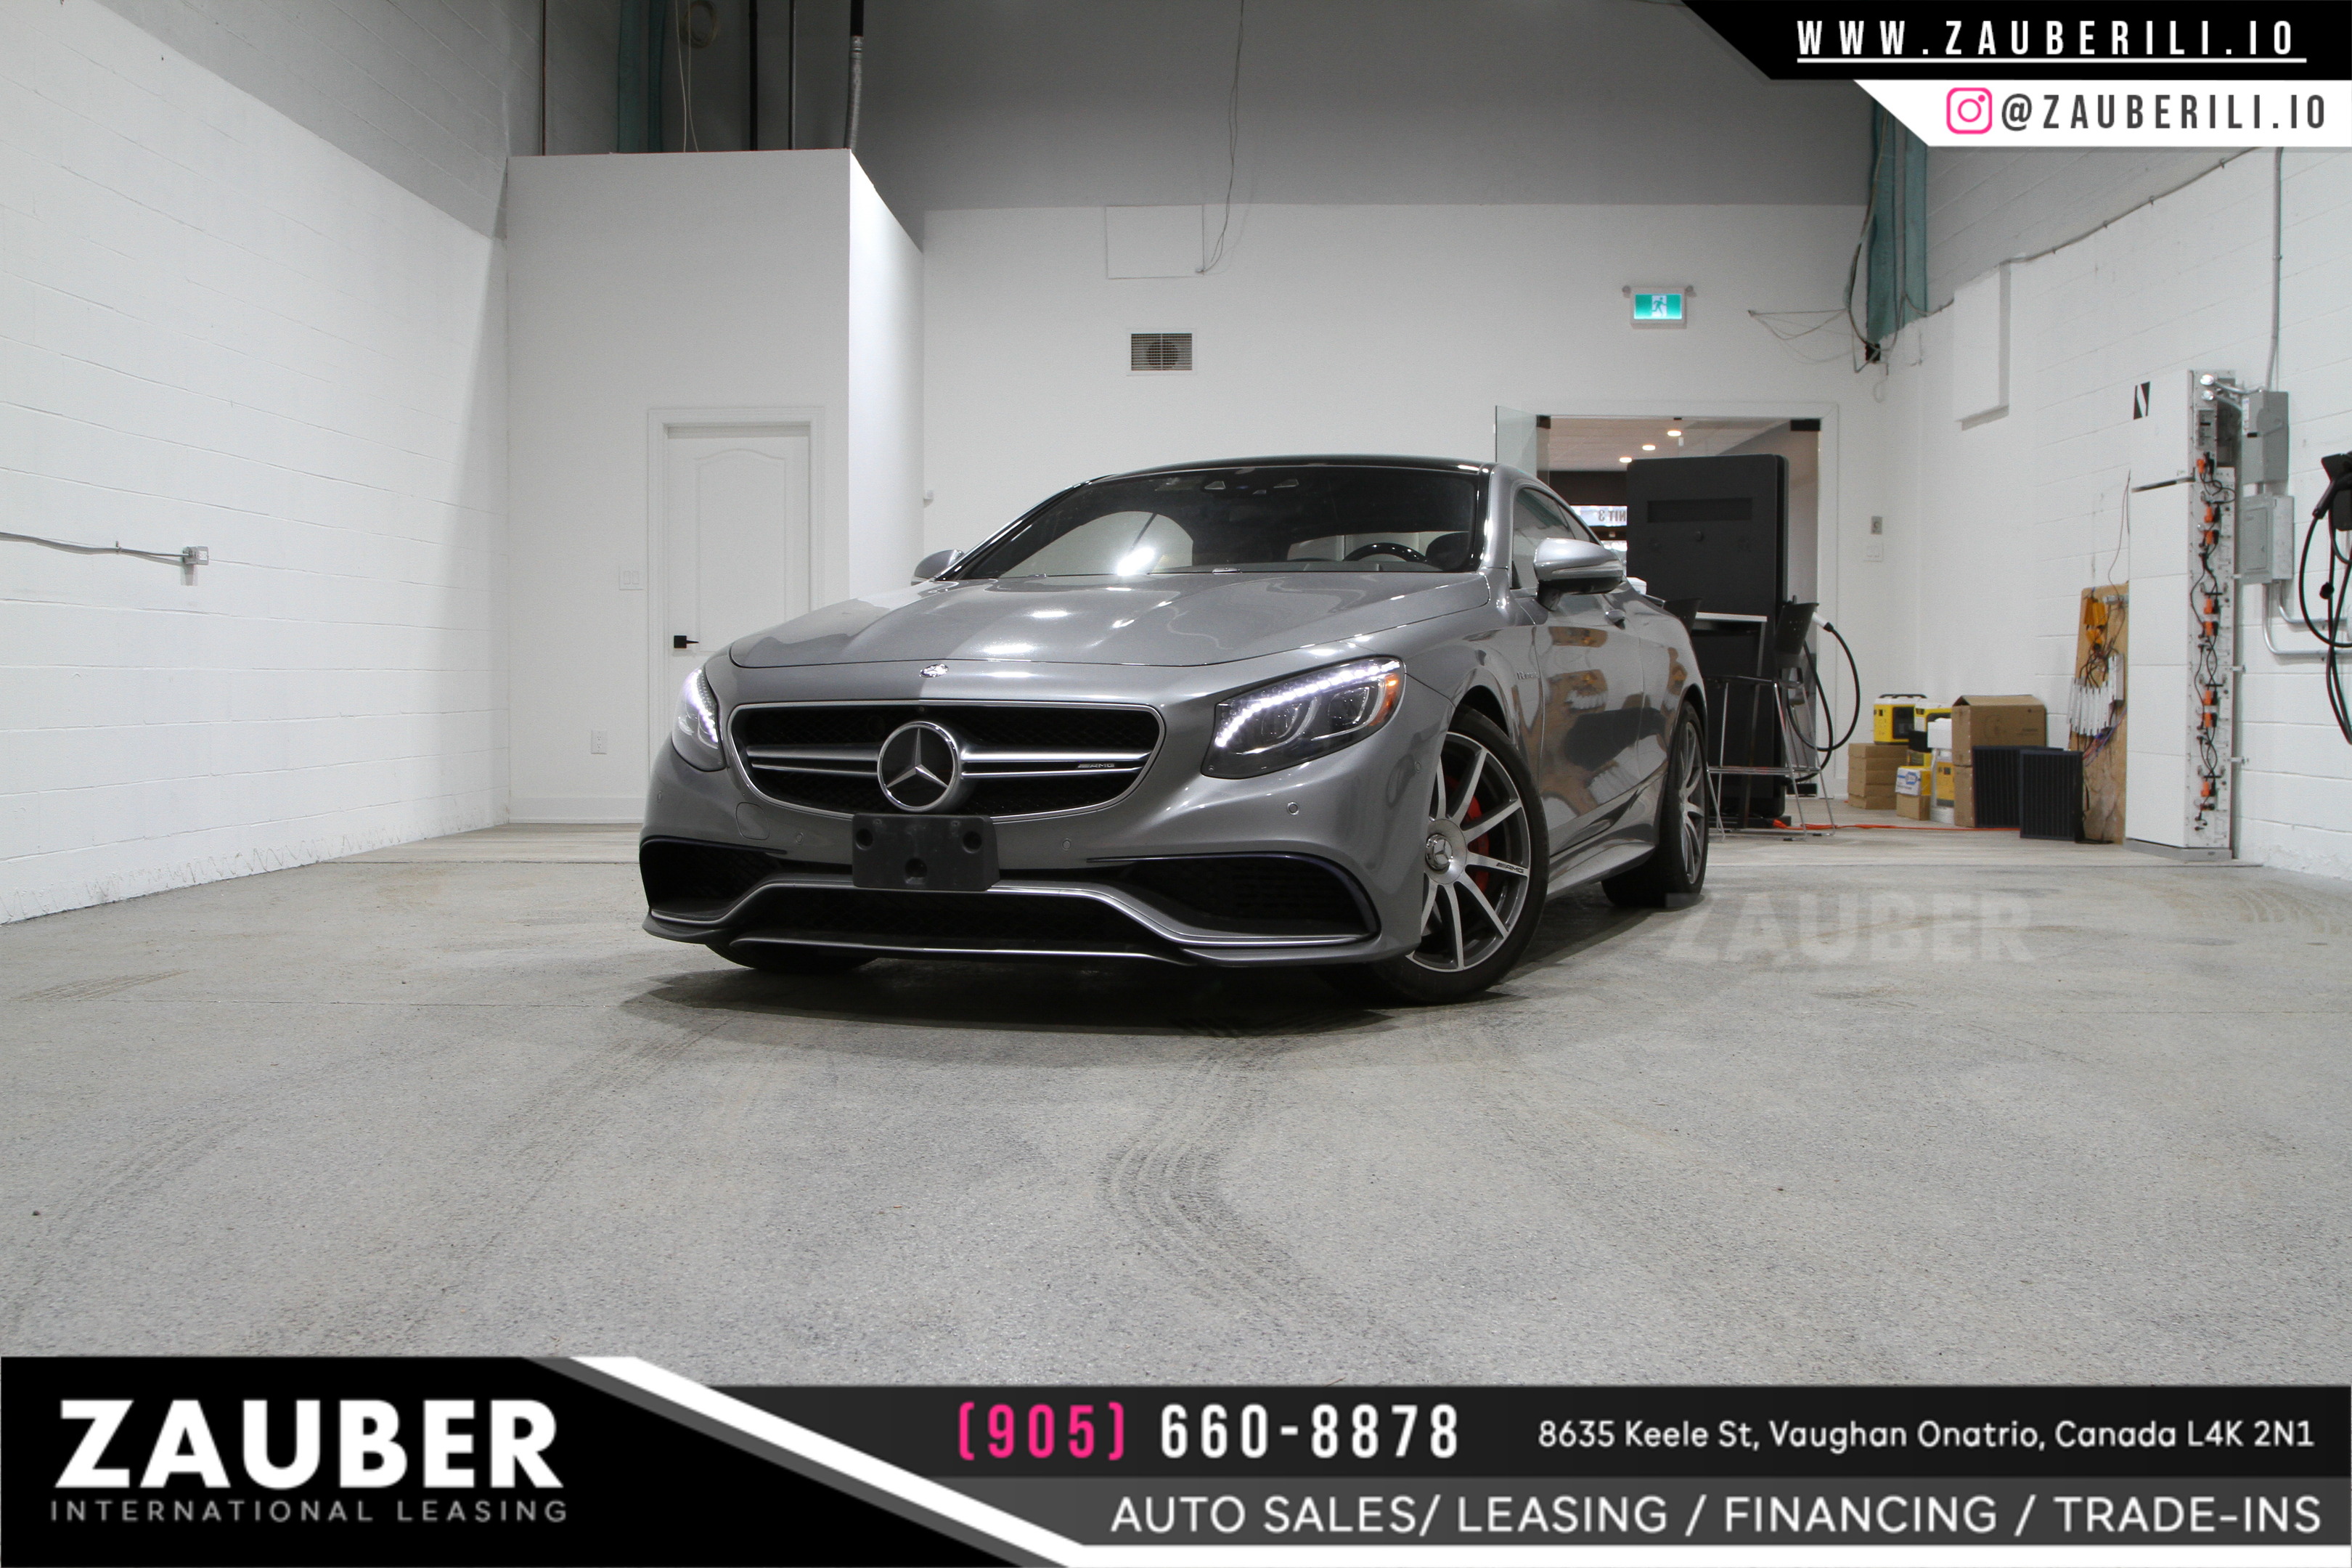 2015 Mercedes-Benz S-Class 2dr Cpe S 63 AMG 4MATIC